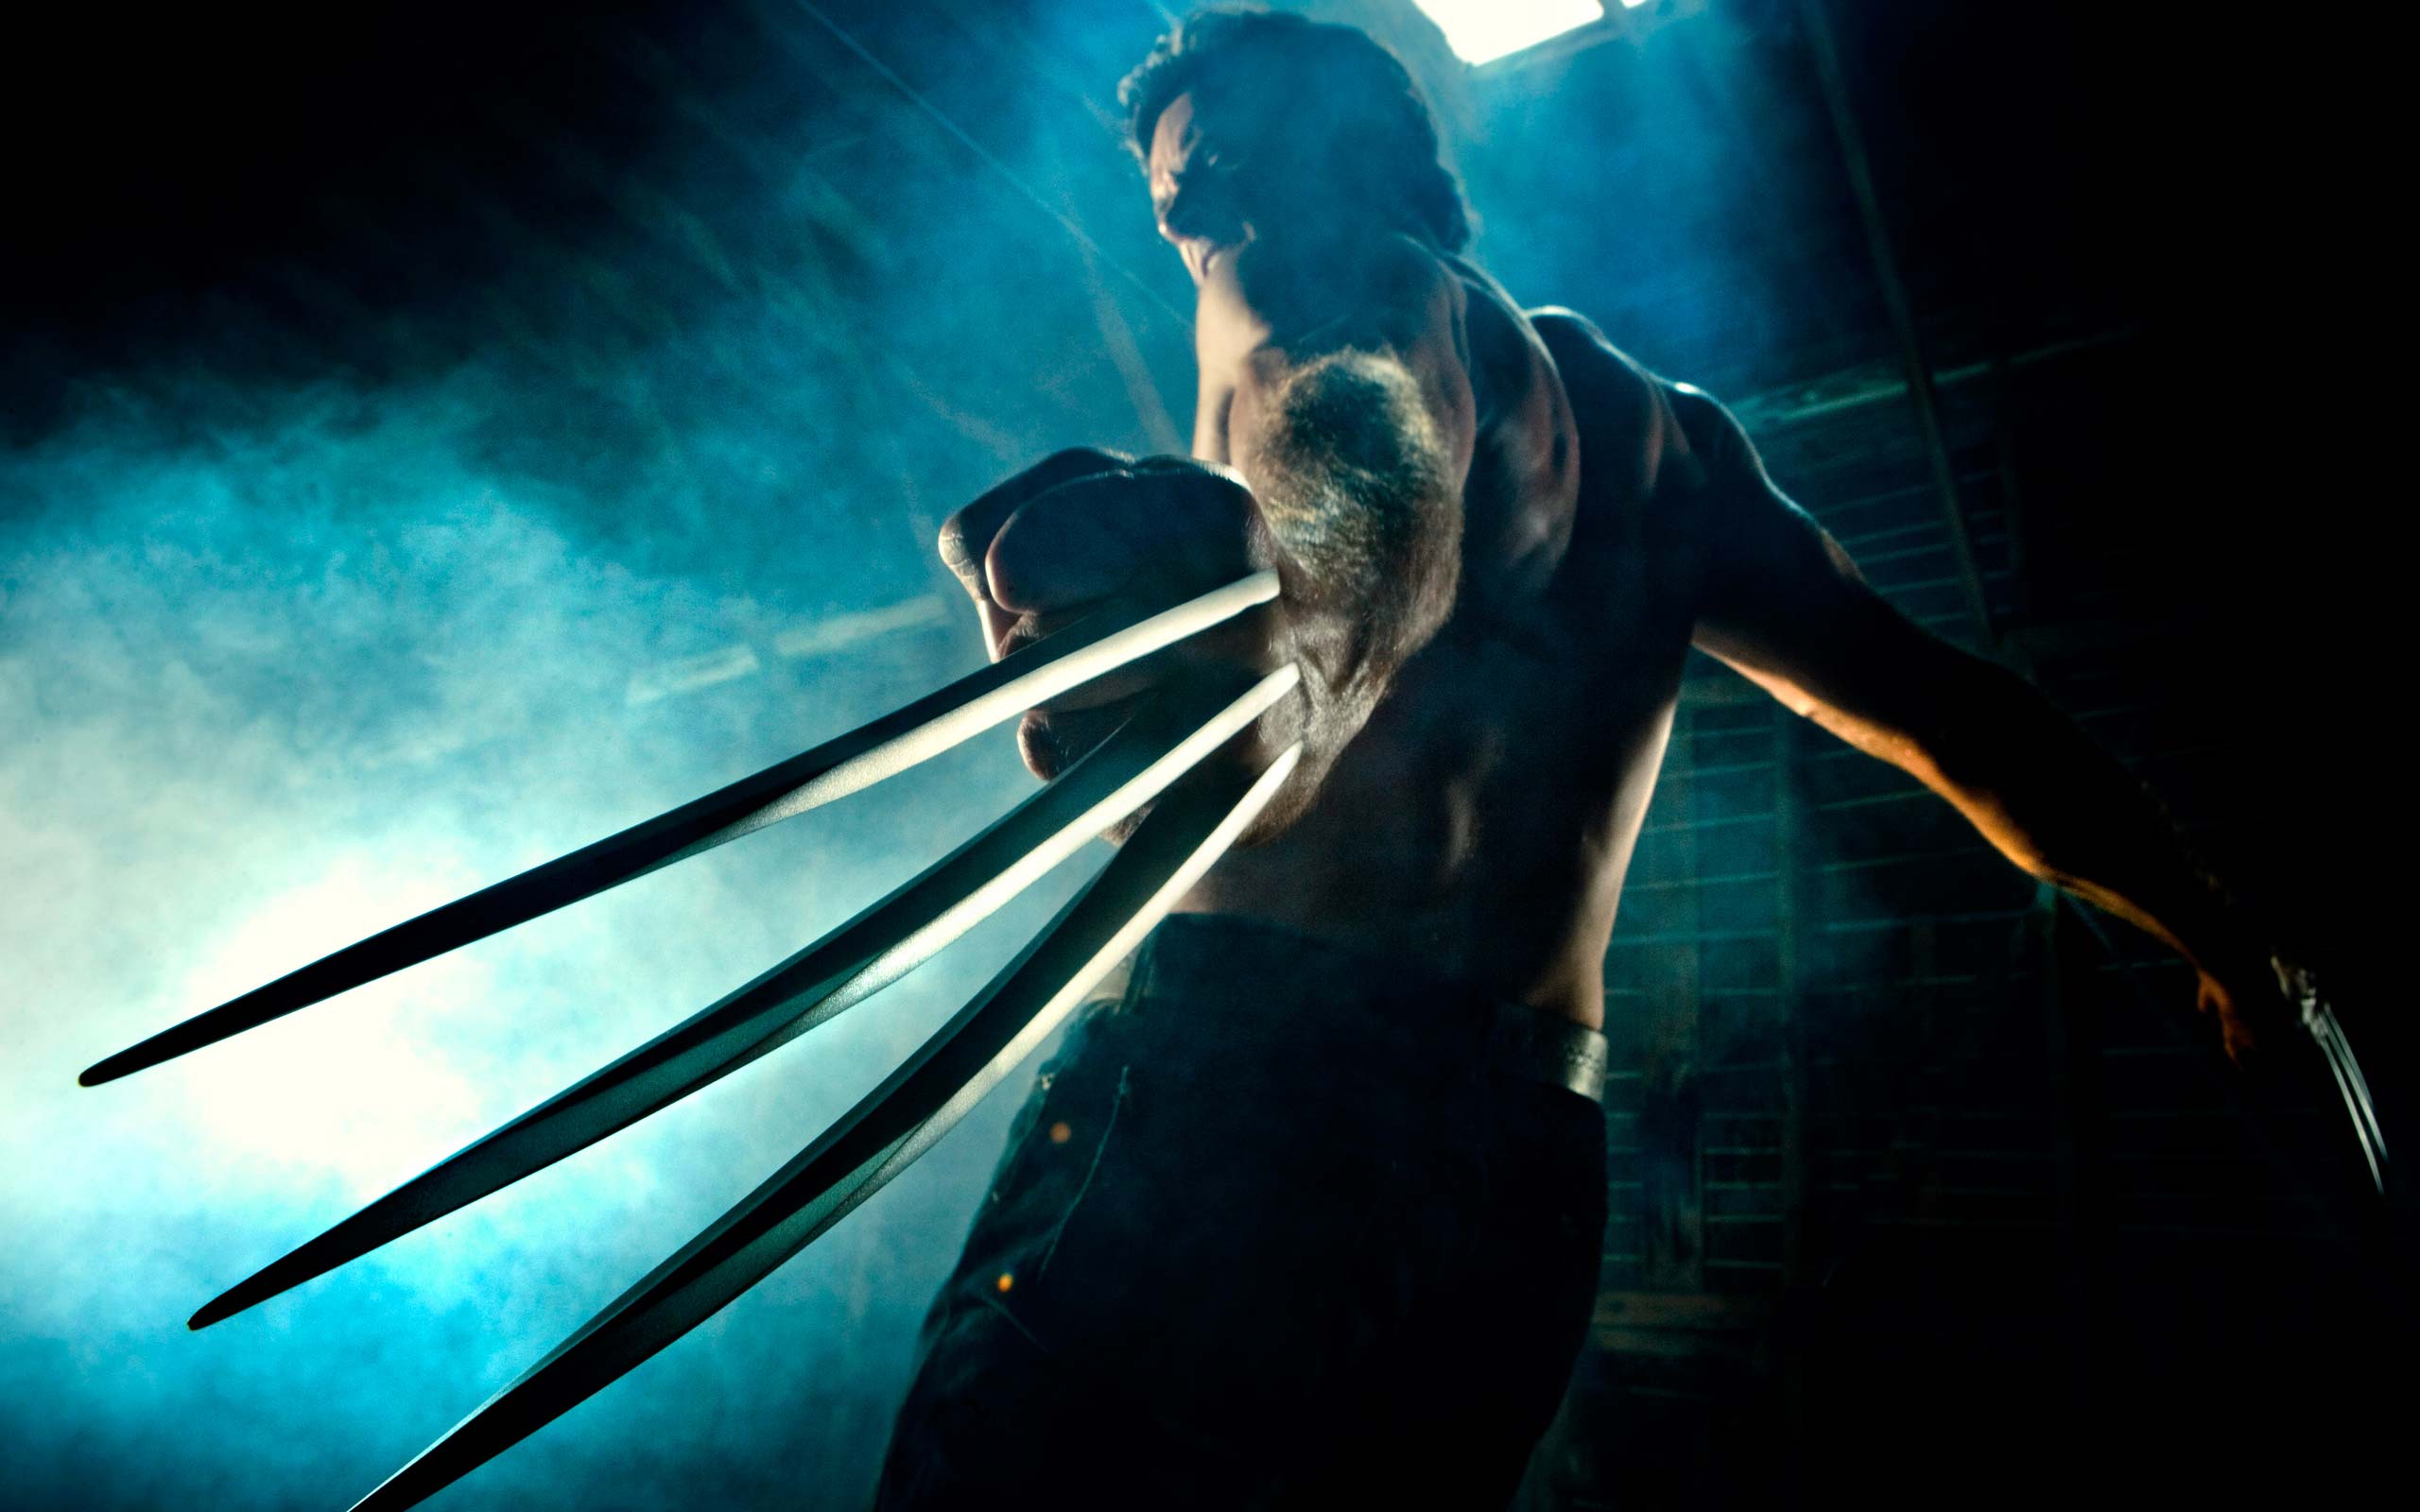 wolverine wallpaper for android,performance,photography,fictional character,darkness,performing arts